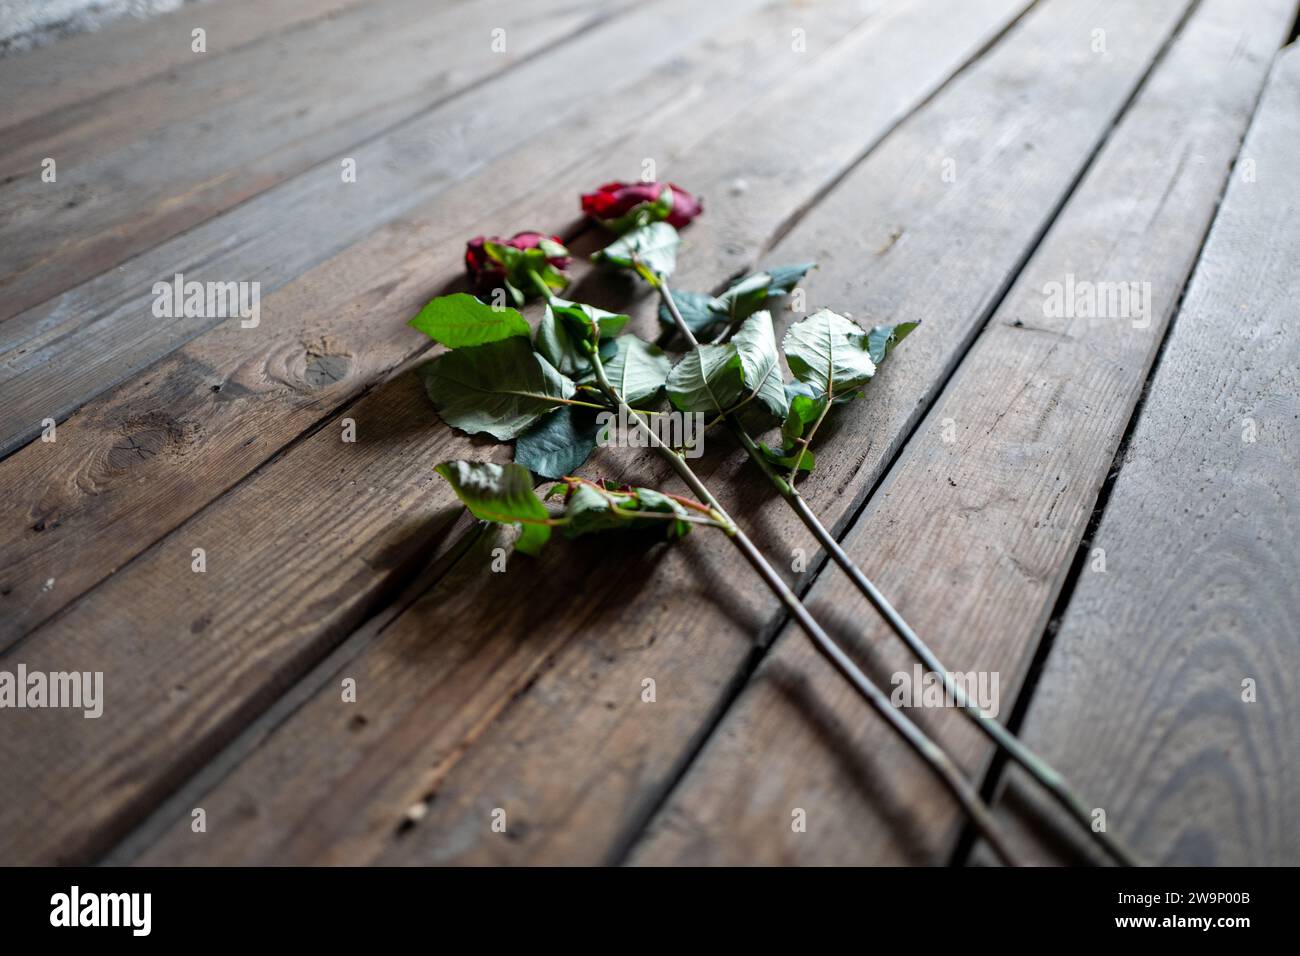 Roses in the accommodation commemorating the deaths at Auschwitz and Birkenau concentration camps, Poland Stock Photo